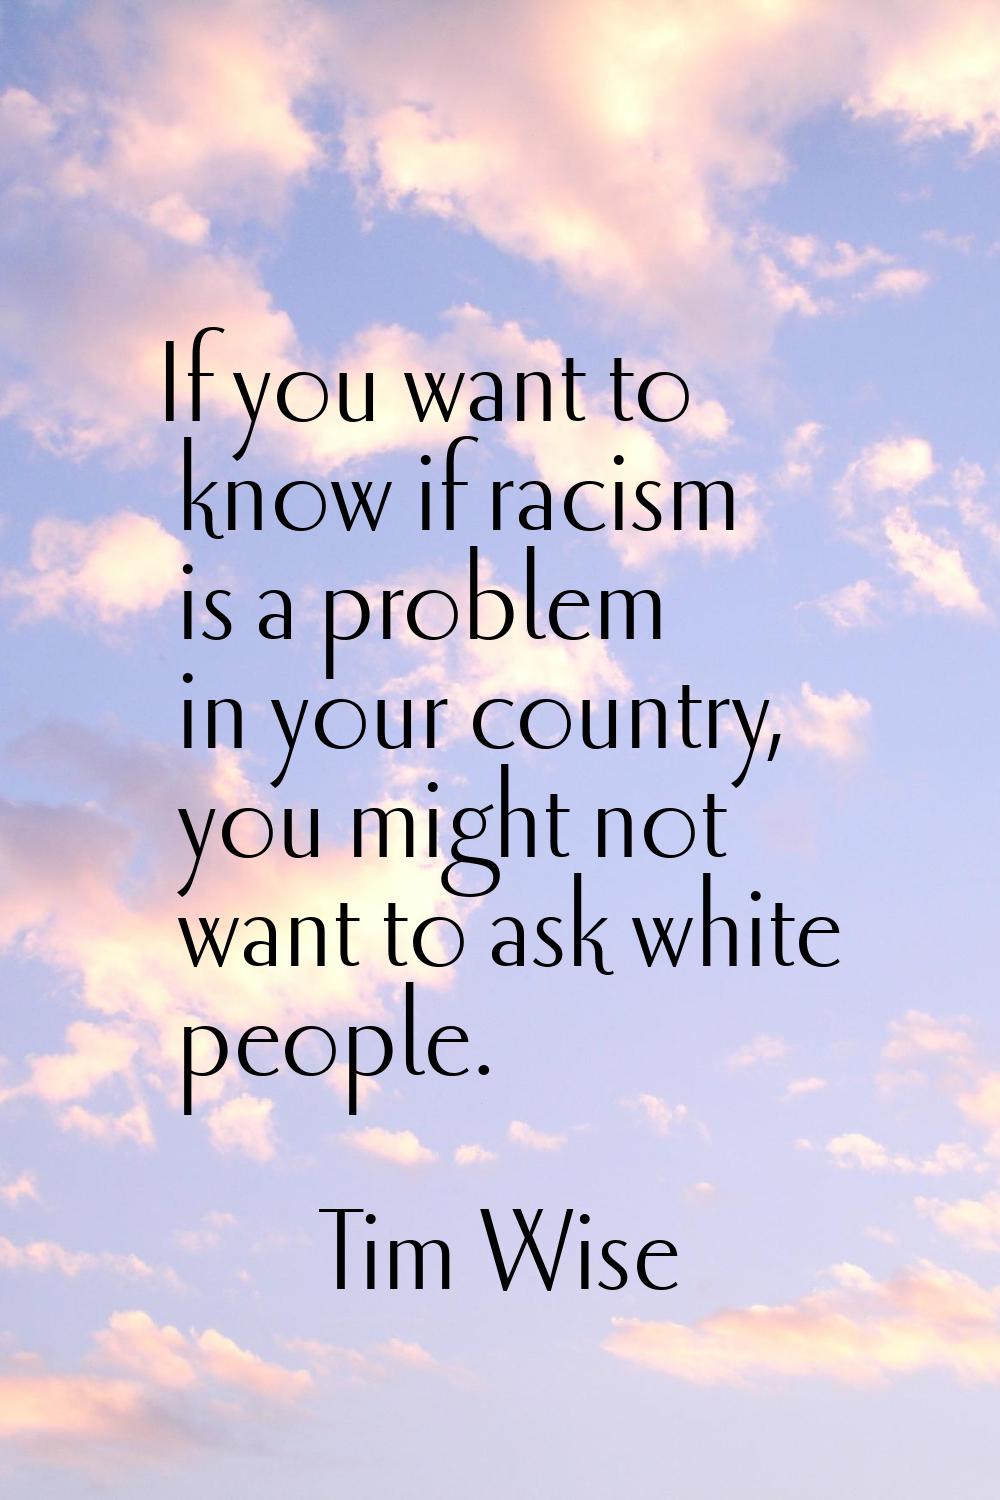 If you want to know if racism is a problem in your country, you might not want to ask white people.